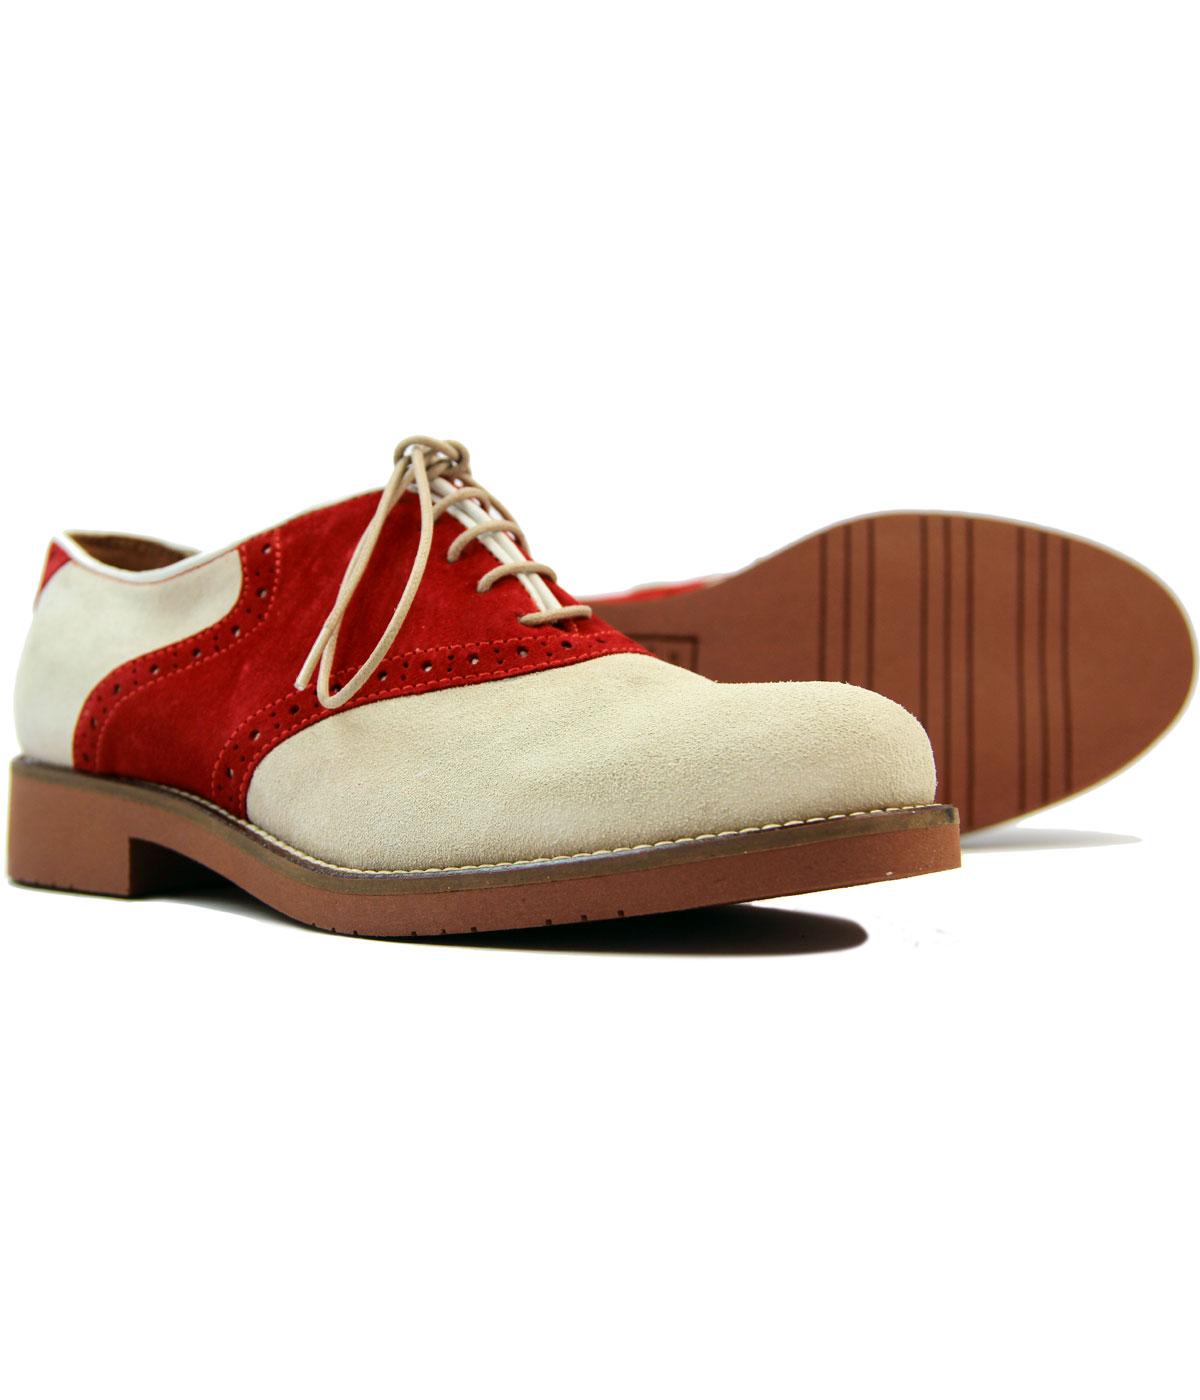 suede saddle shoes